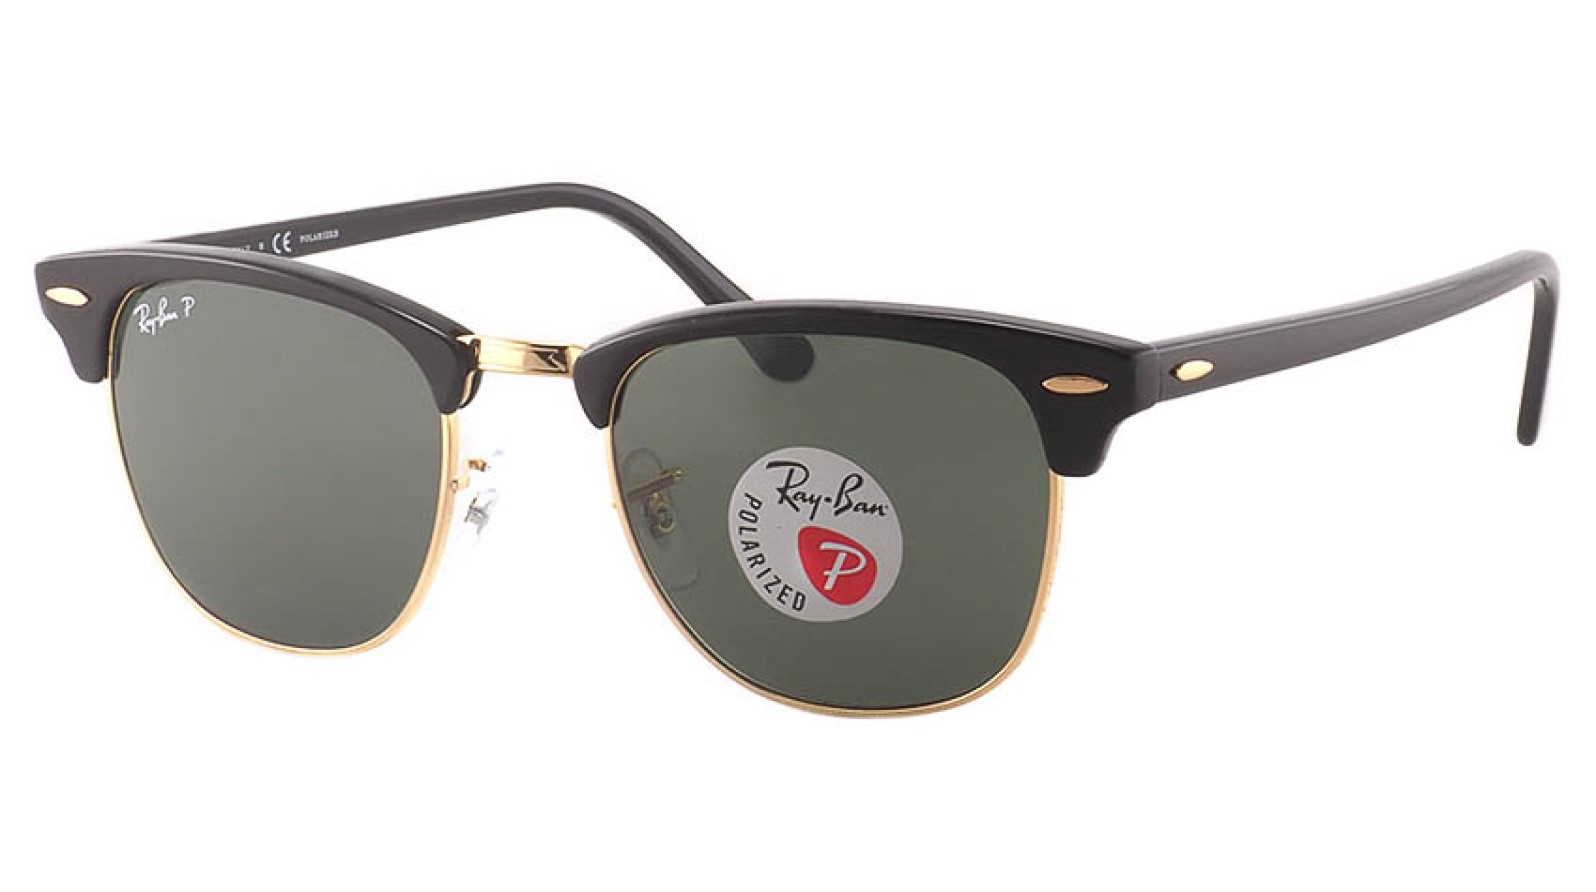 Ray-Ban Clubmaster RB 3016 901/58 ray ban clubmaster rx 5154 2372